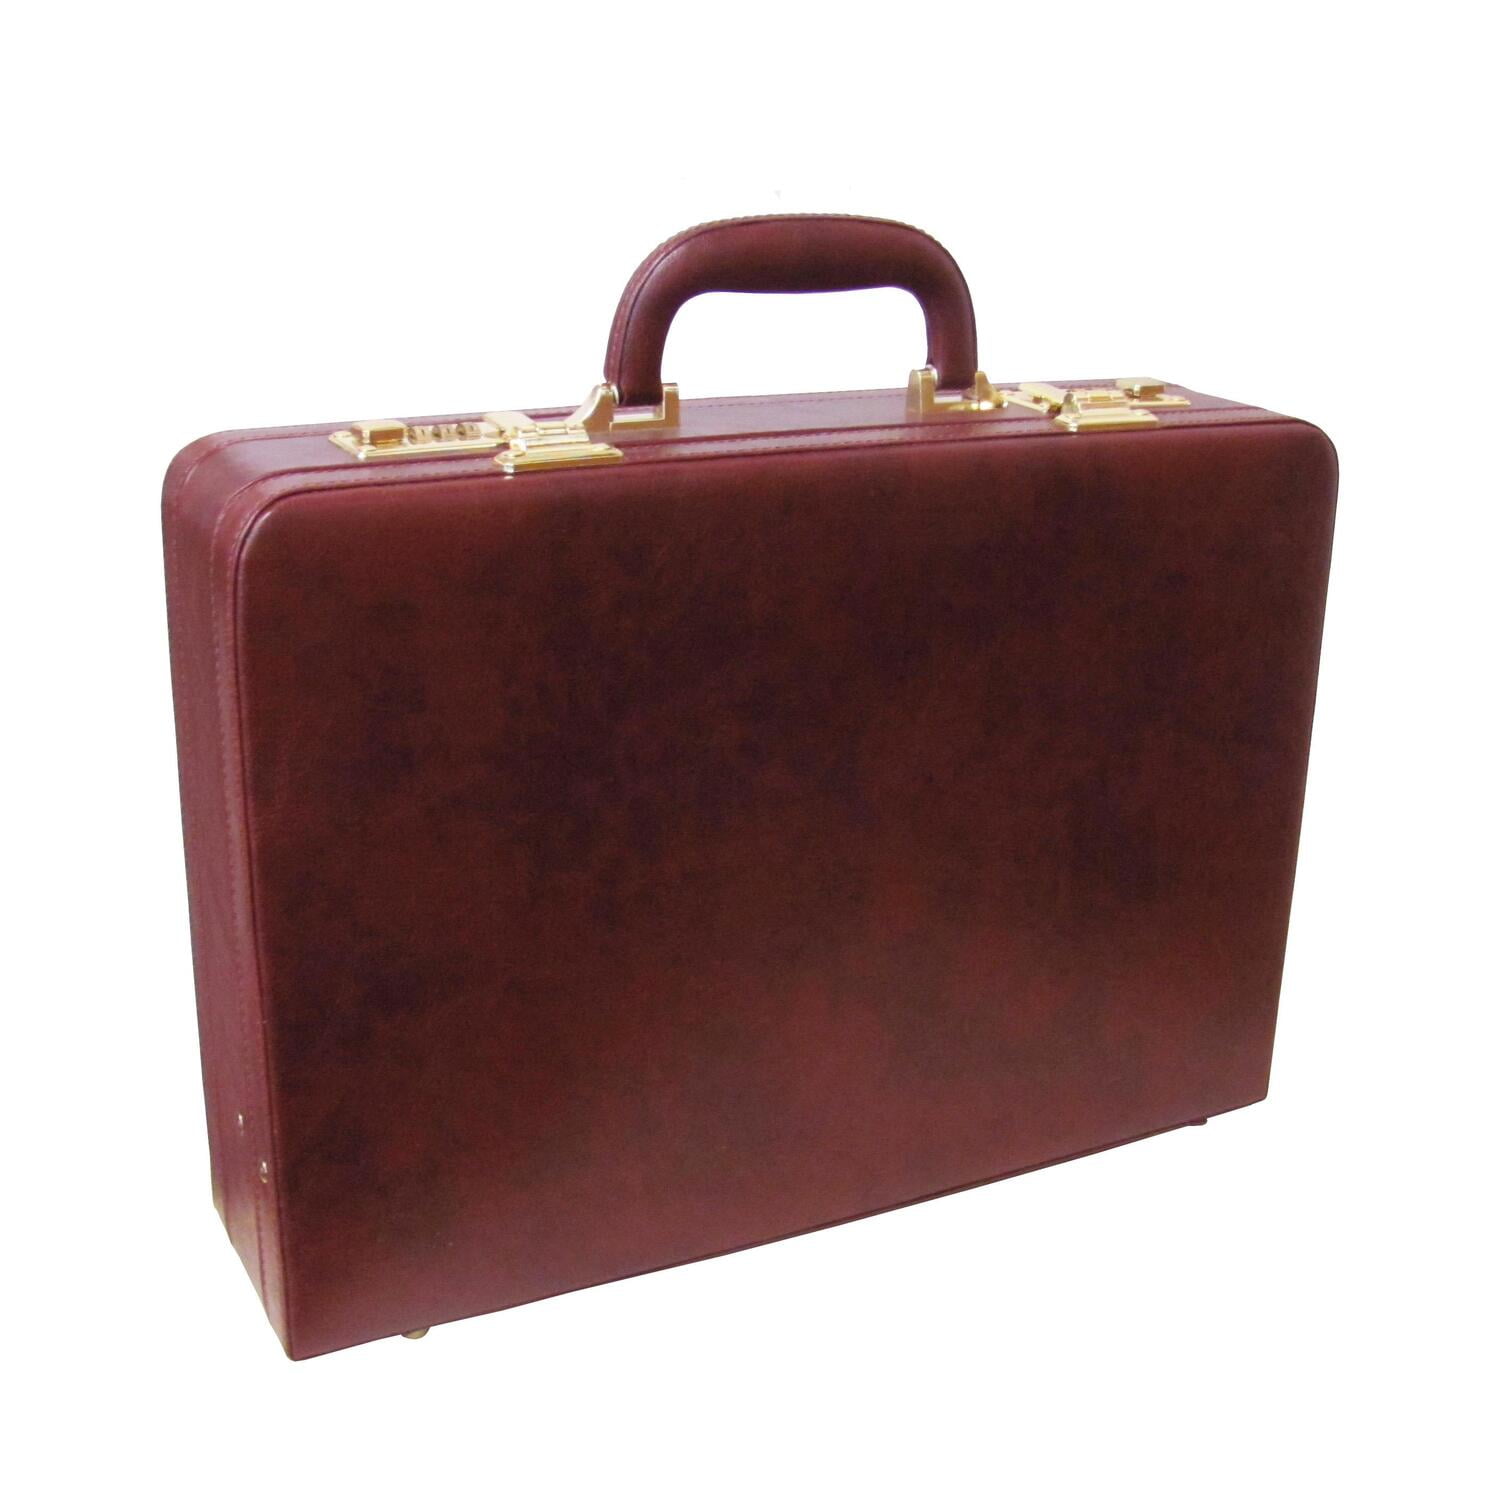 Executive Faux Leather Business Briefcase Attache Travel Case Office Work Bag 